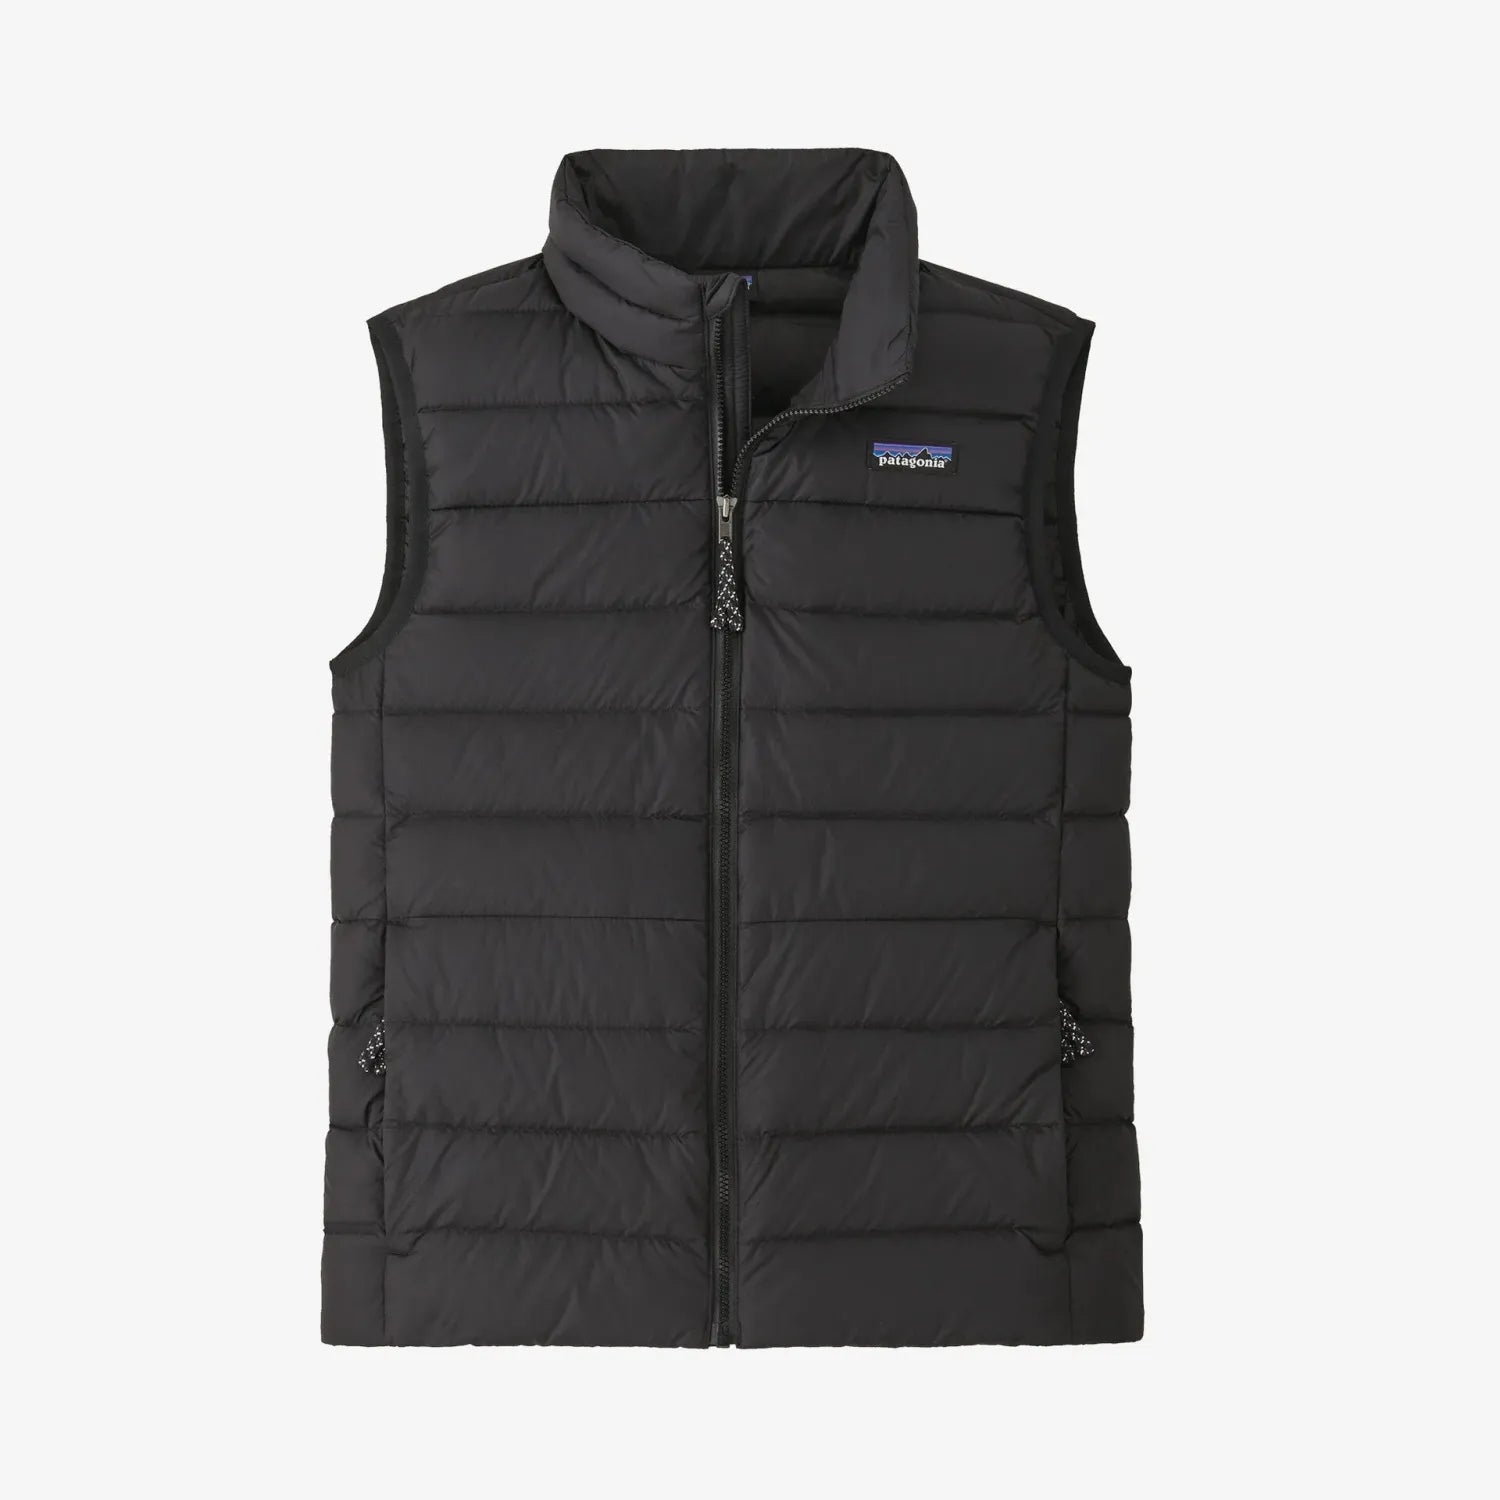 Patagonia Kid's Down Sweater Vest shown in the Black color option. Front view.